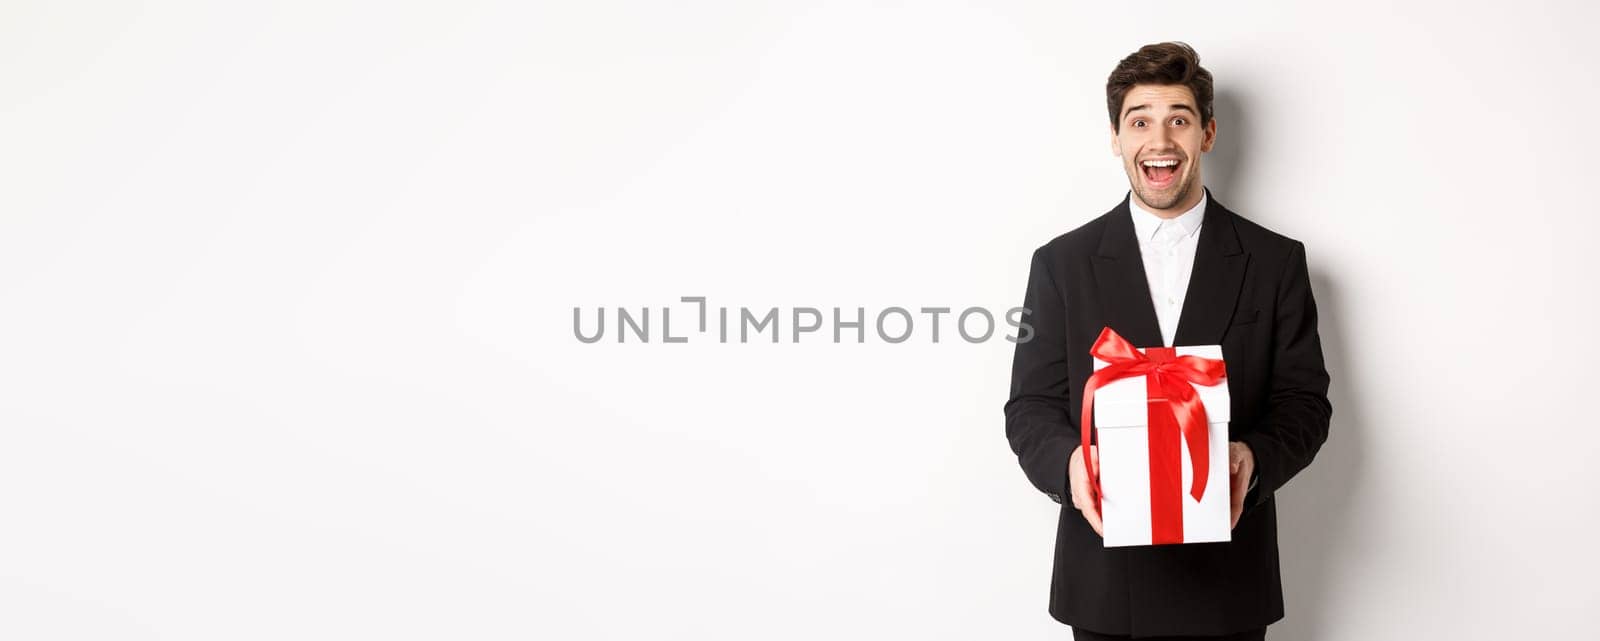 Concept of christmas holidays, celebration and lifestyle. Image of handsome guy in black suit looking excited, have a gift, standing against white background.